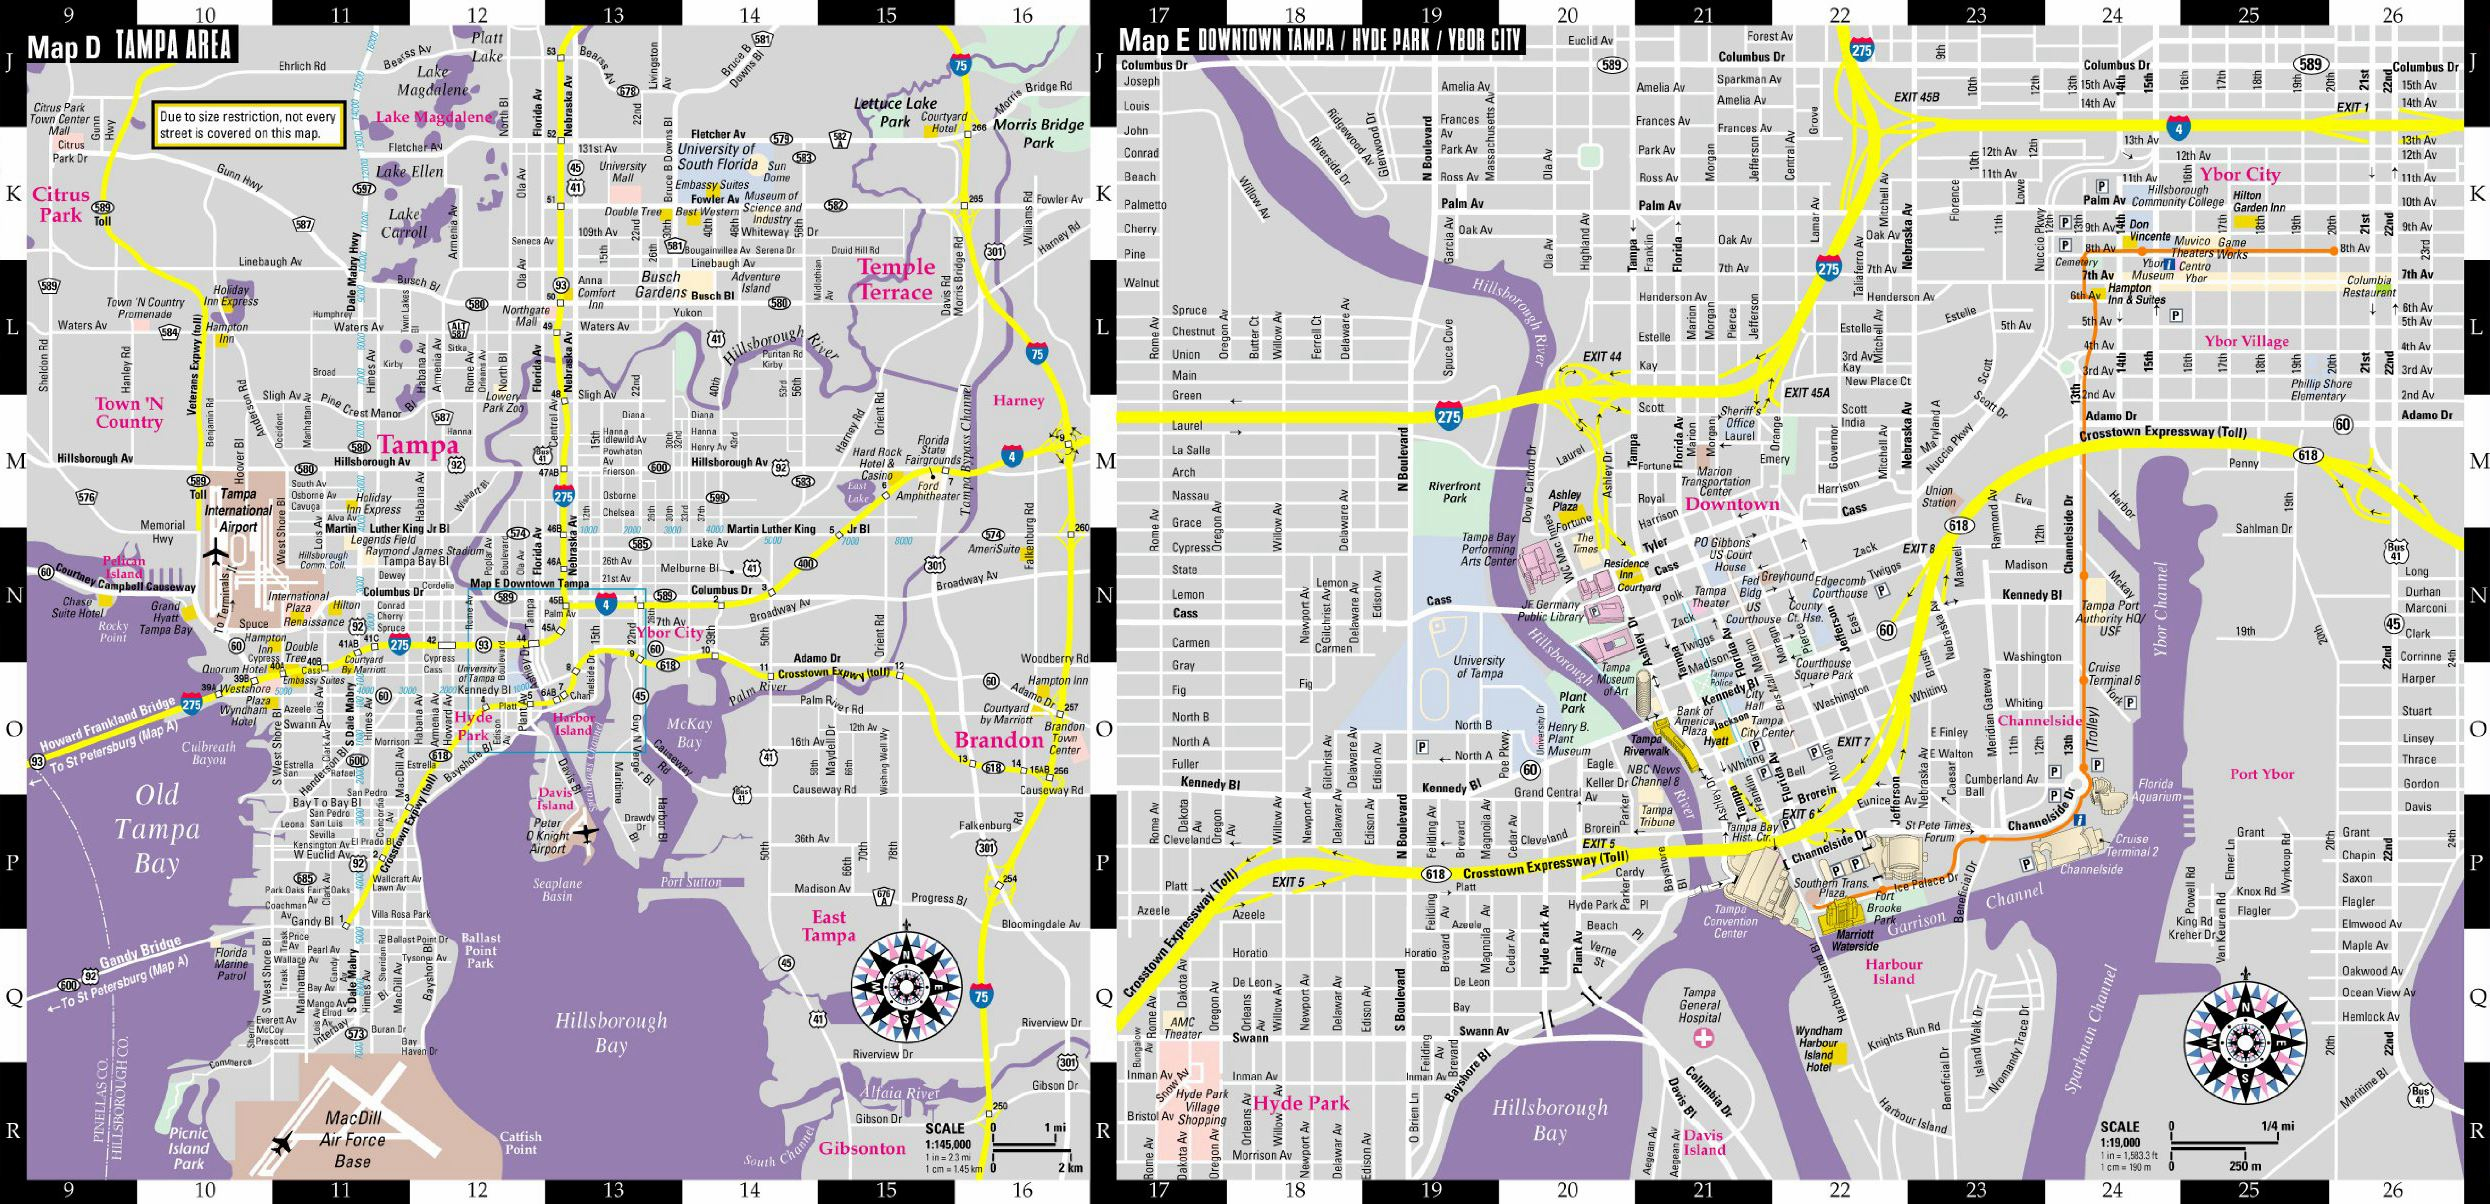 Large Tampa Maps For Free Download And Print | High-Resolution And - Tampa Florida Airport Hotels Map